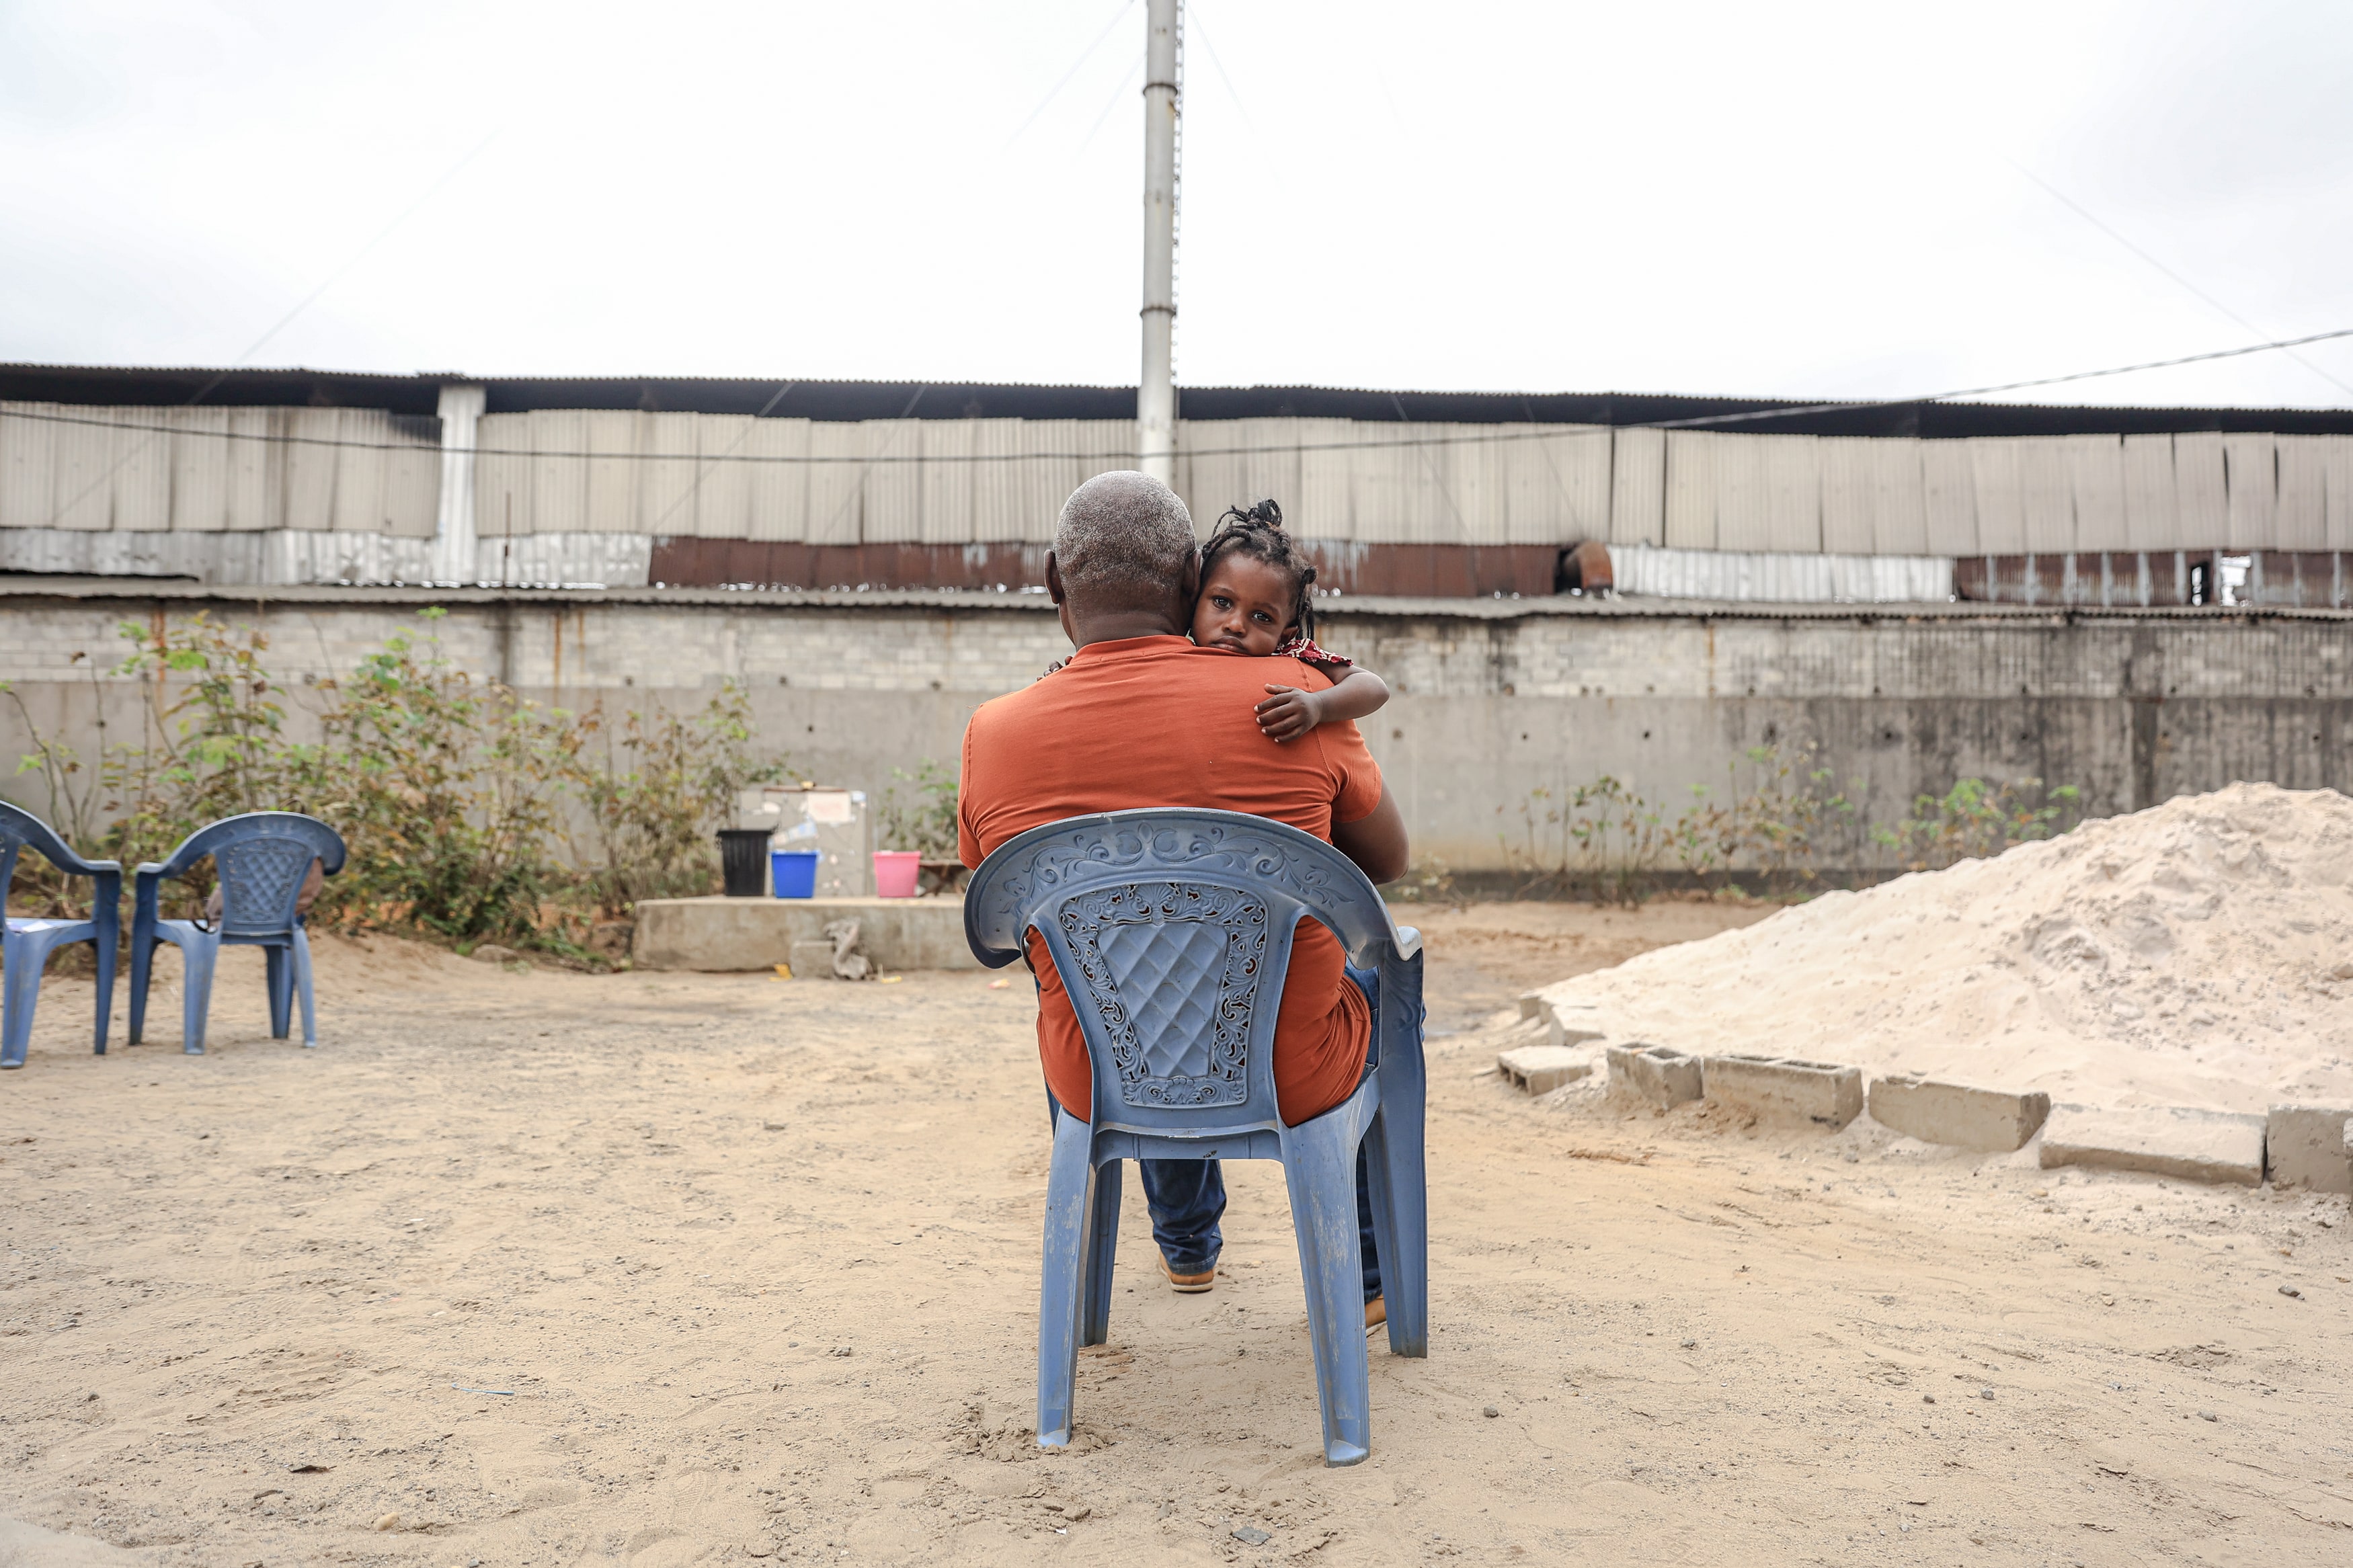 A little girl hugs a man who's sitting on a plastic chair in a sandy yard.